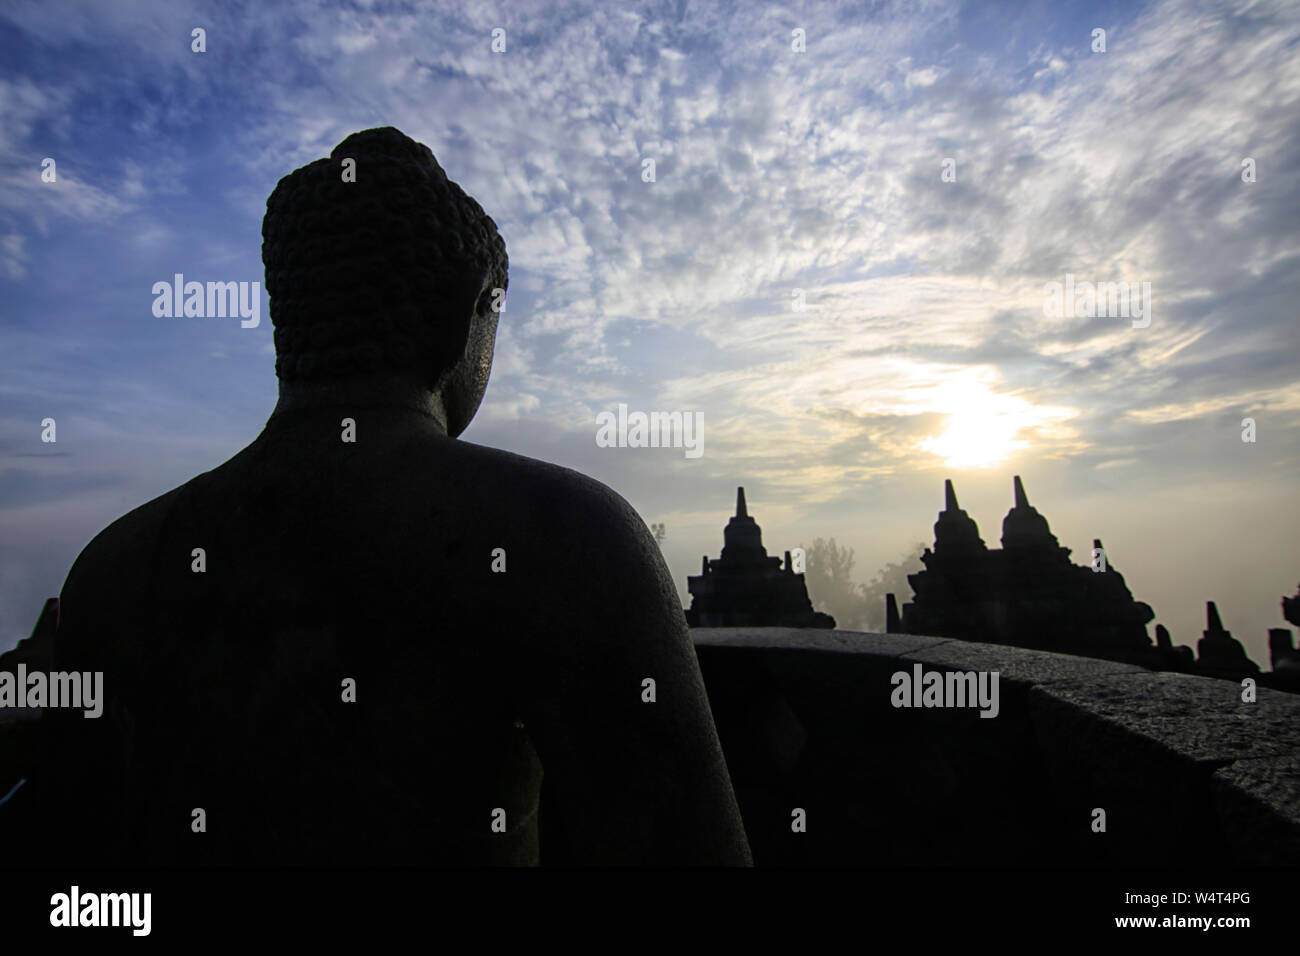 Silhouette of a Buddha statue at sunrise, Borobudur Temple, Magelang, Central Java, Indonesia Stock Photo